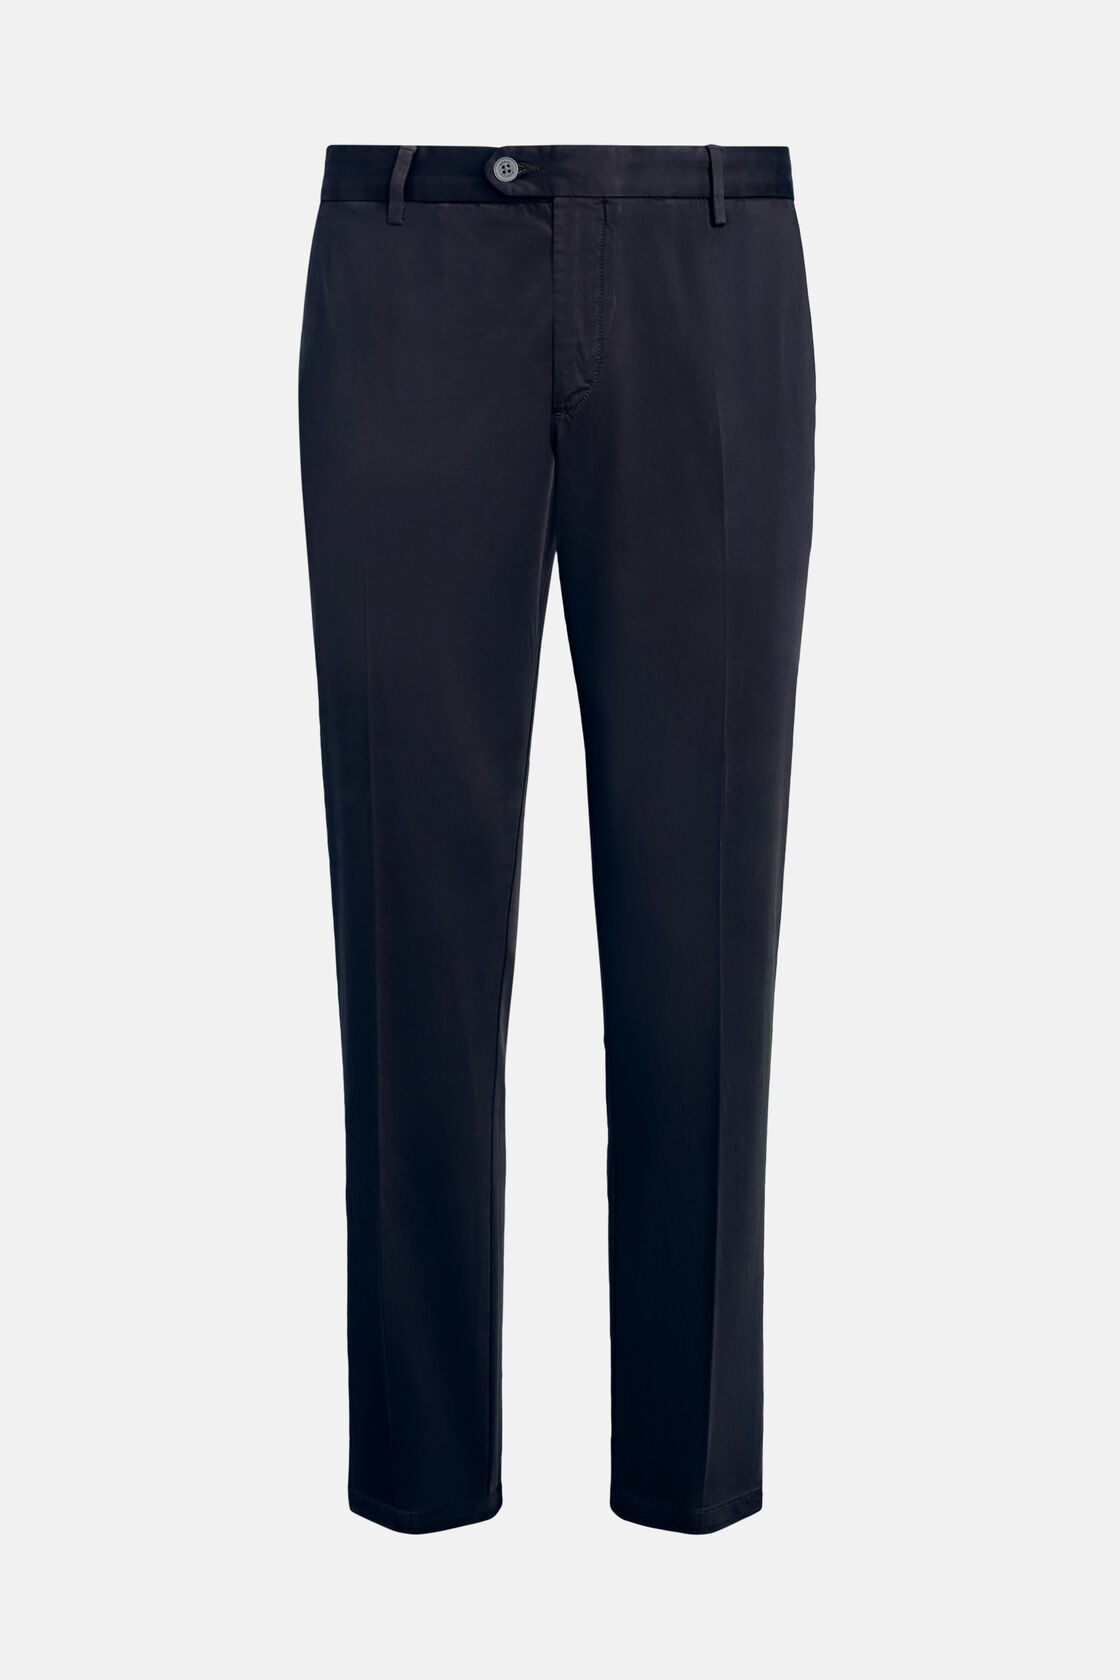 Stretch satin trousers, Navy blue, hi-res